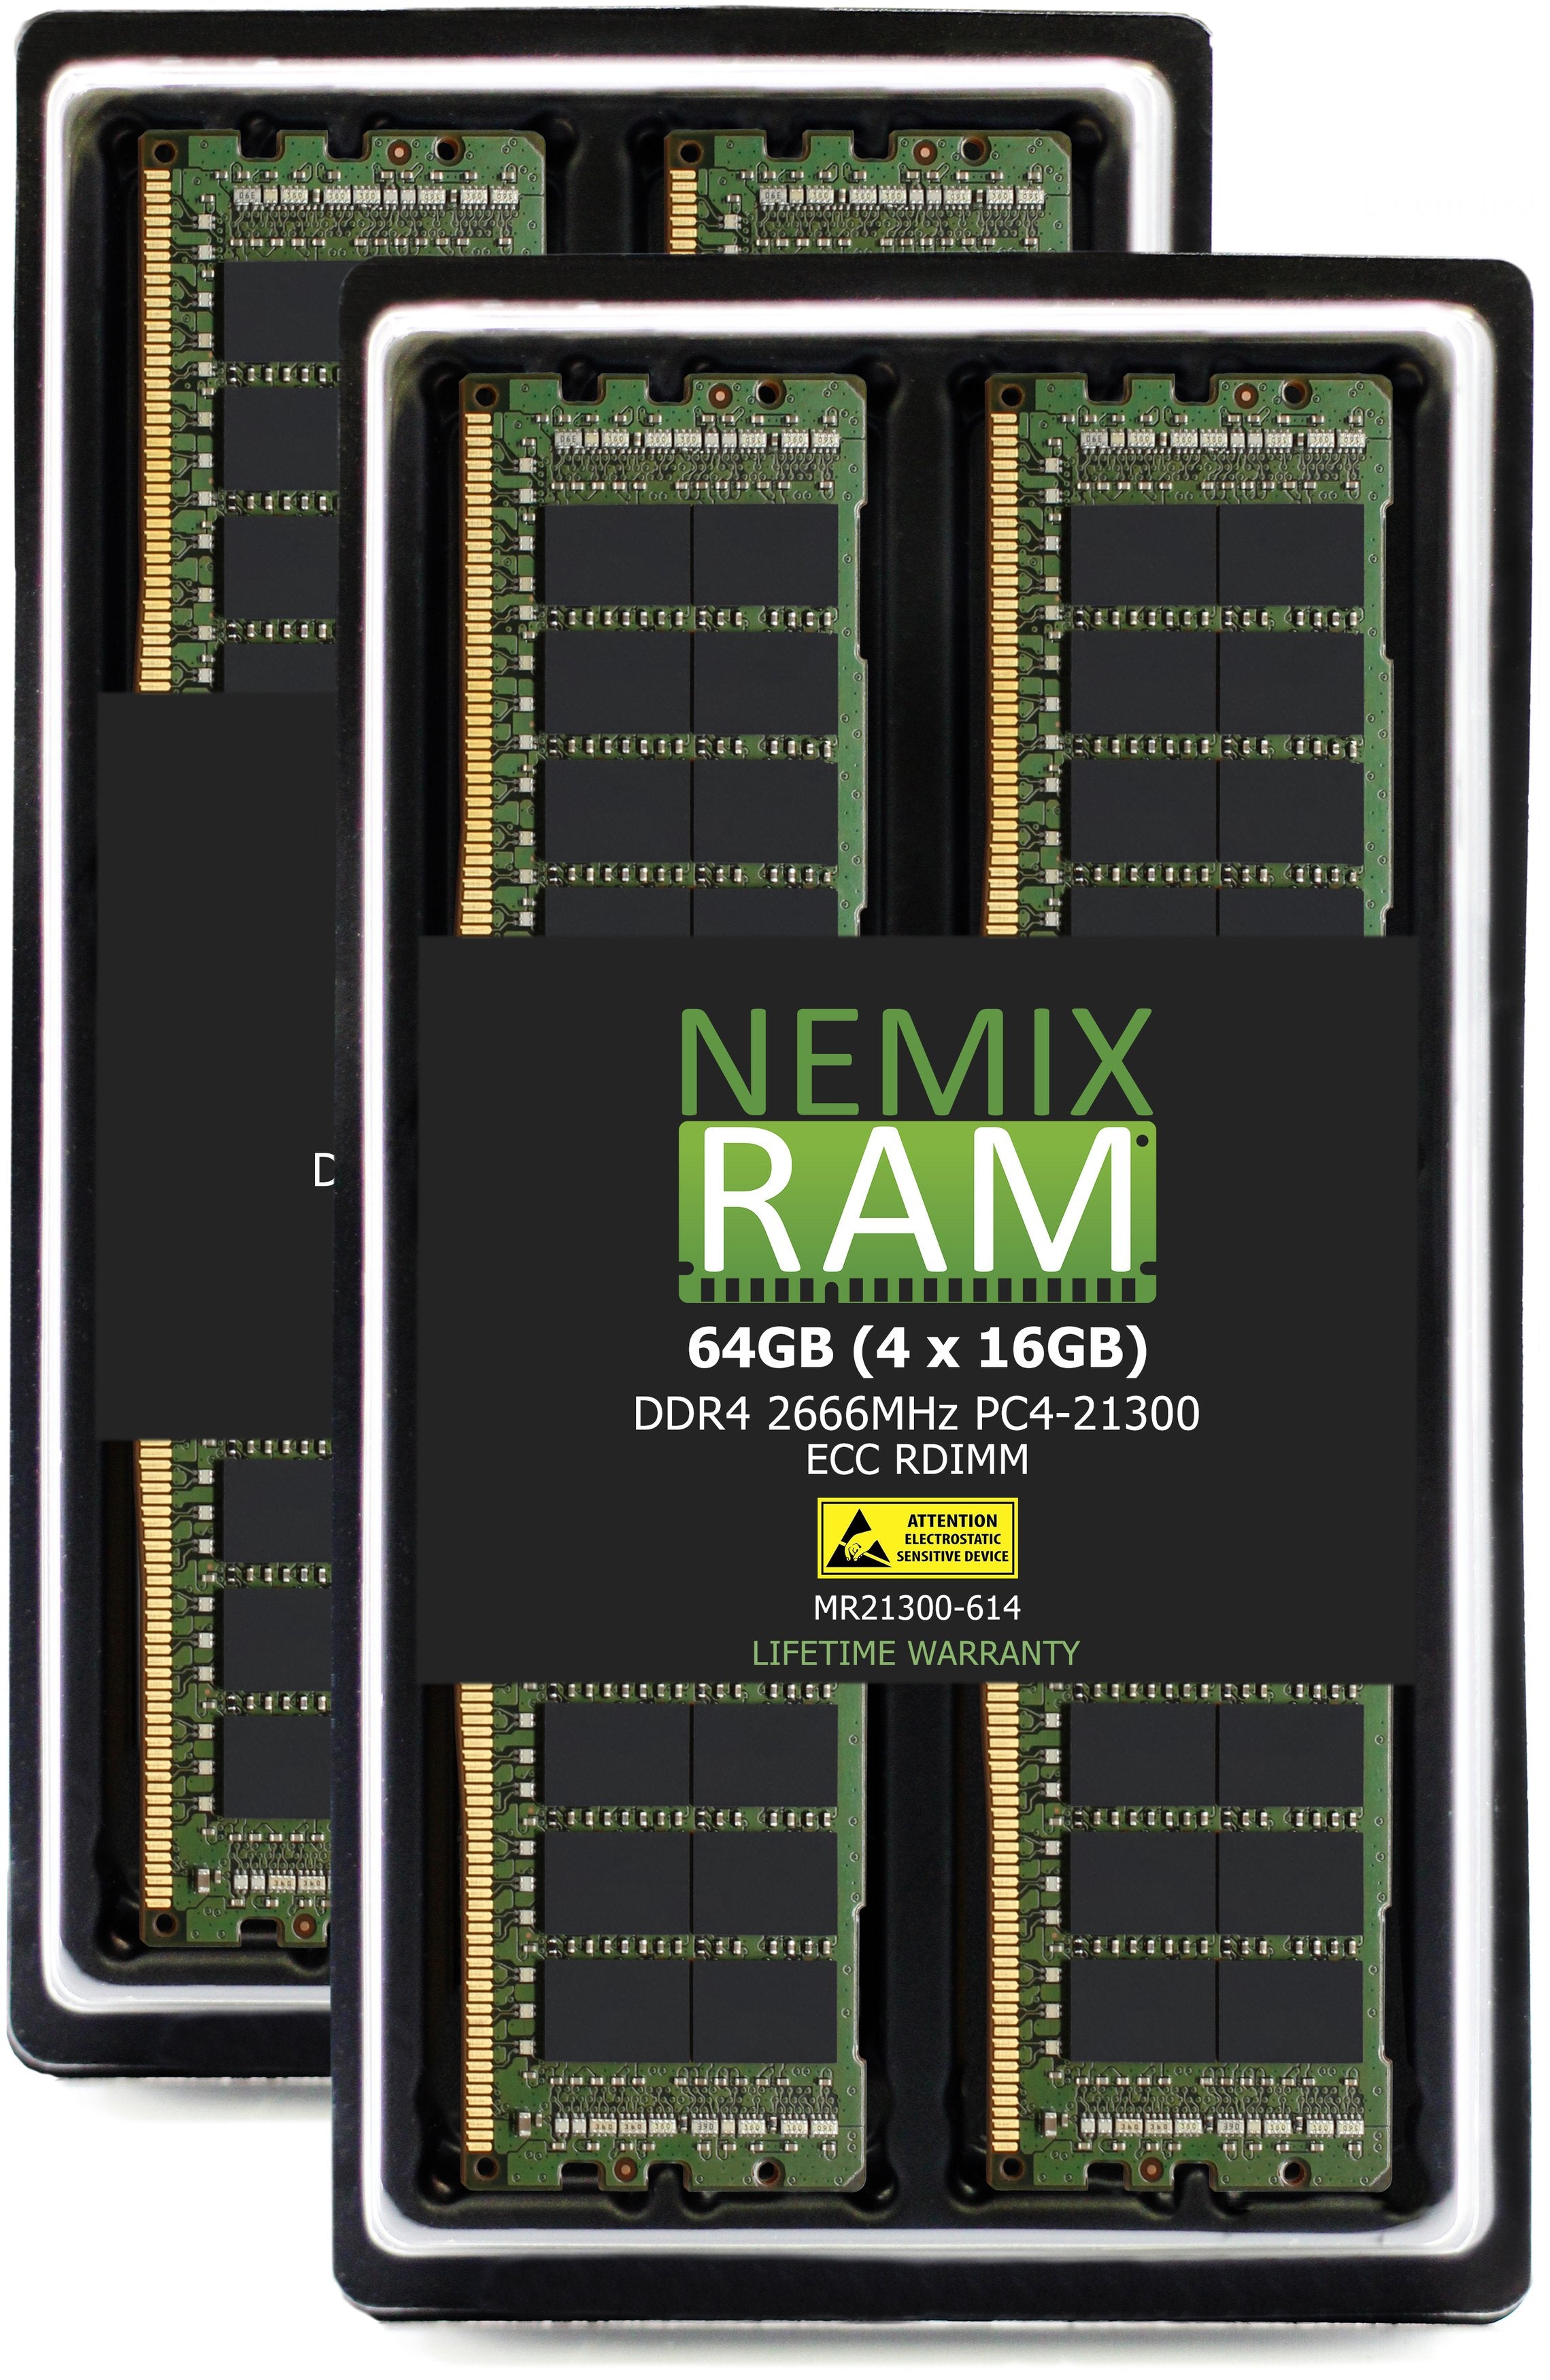 DDR4 2666MHZ PC4-21300 RDIMM Compatible with Synology D4RD-2666-16G